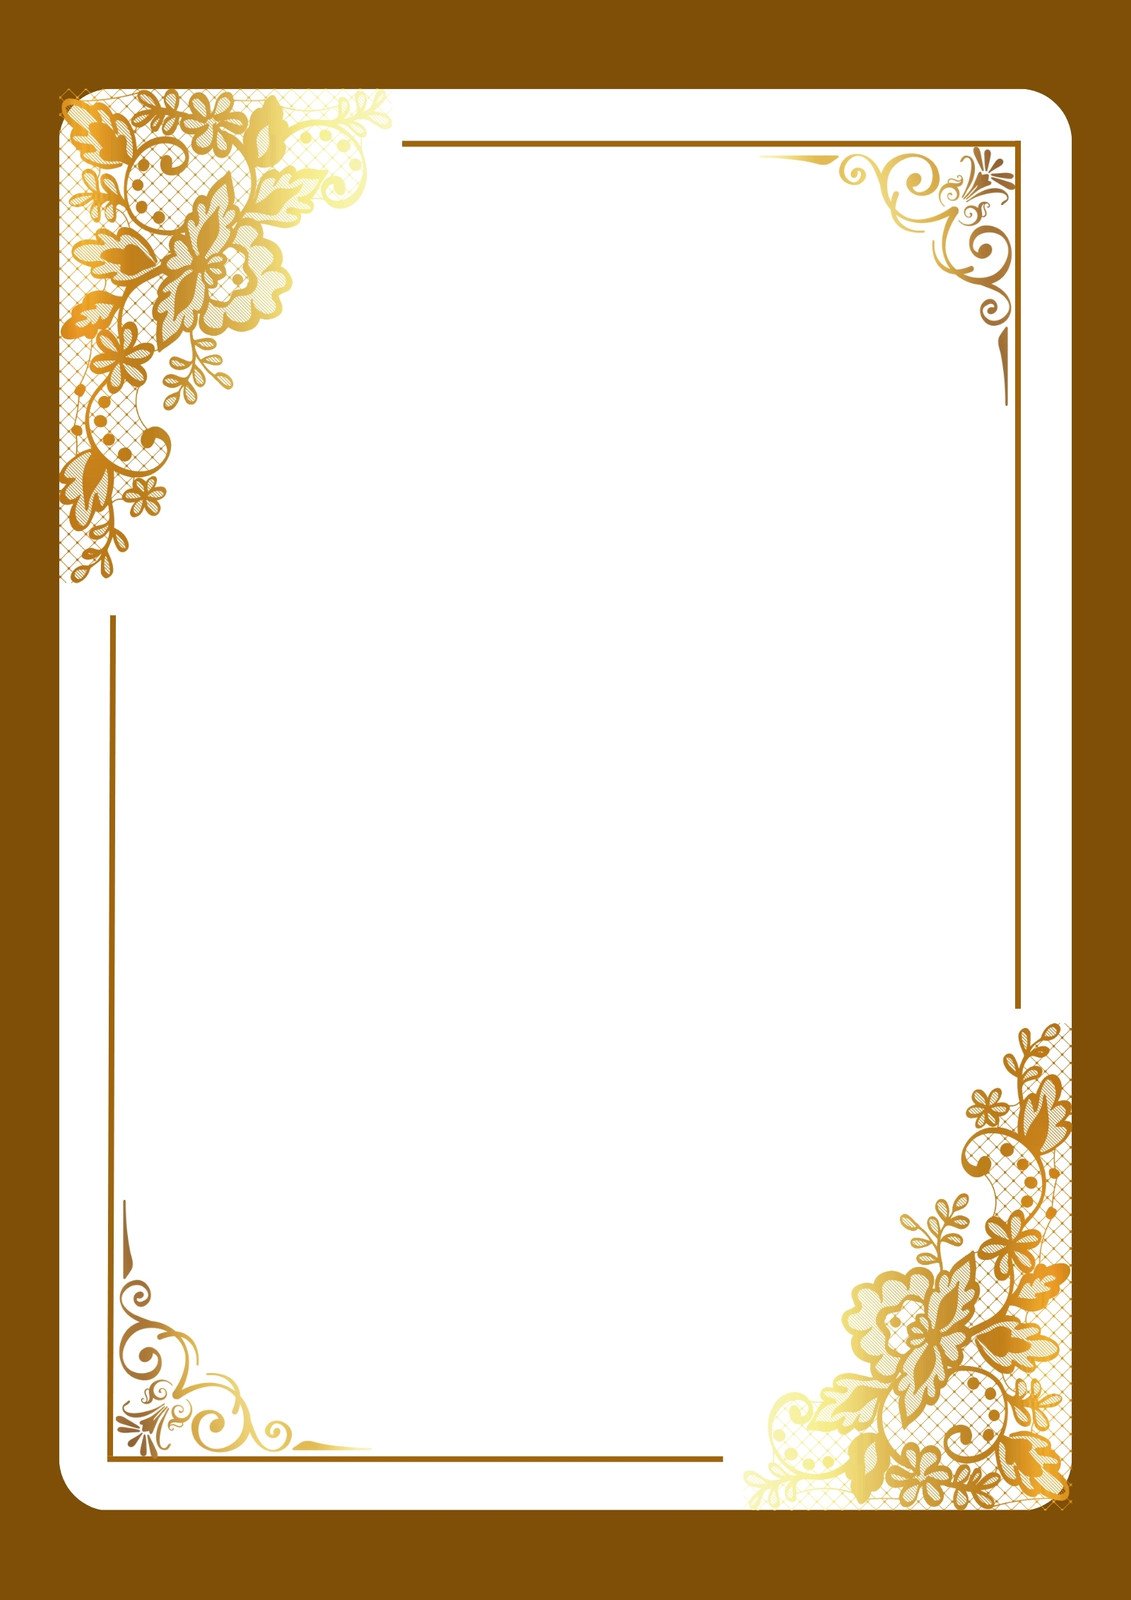 Free Printable Page Border Templates You Can Customize | Canva